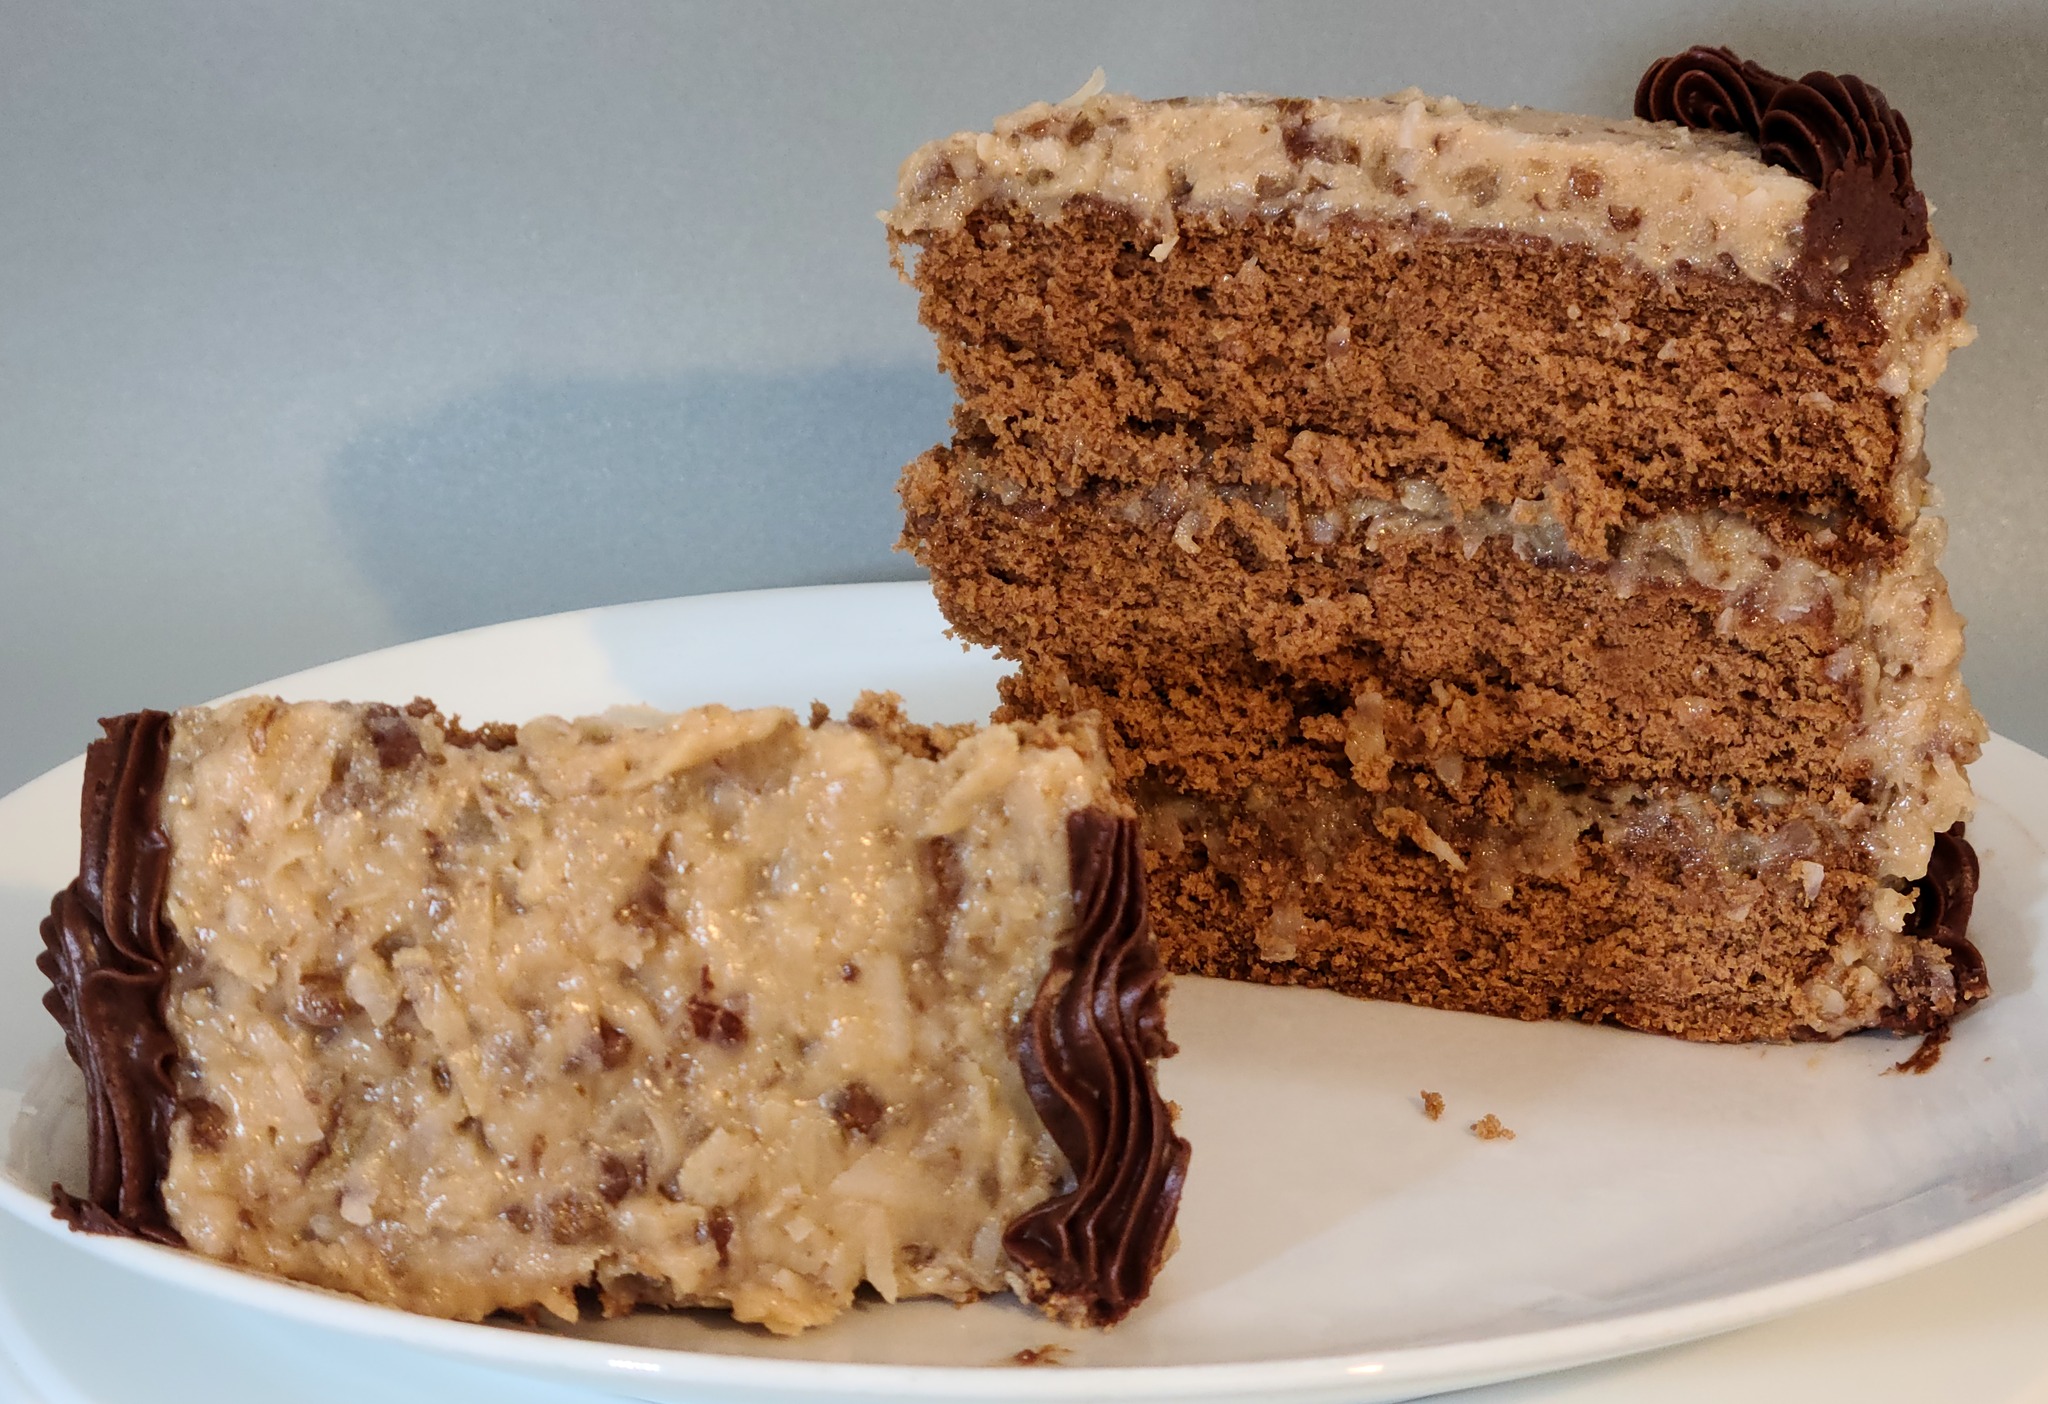 Classic German Chocolate Cake | Raleigh NC (pic: facebook.com/premiercakesbakerycafe)